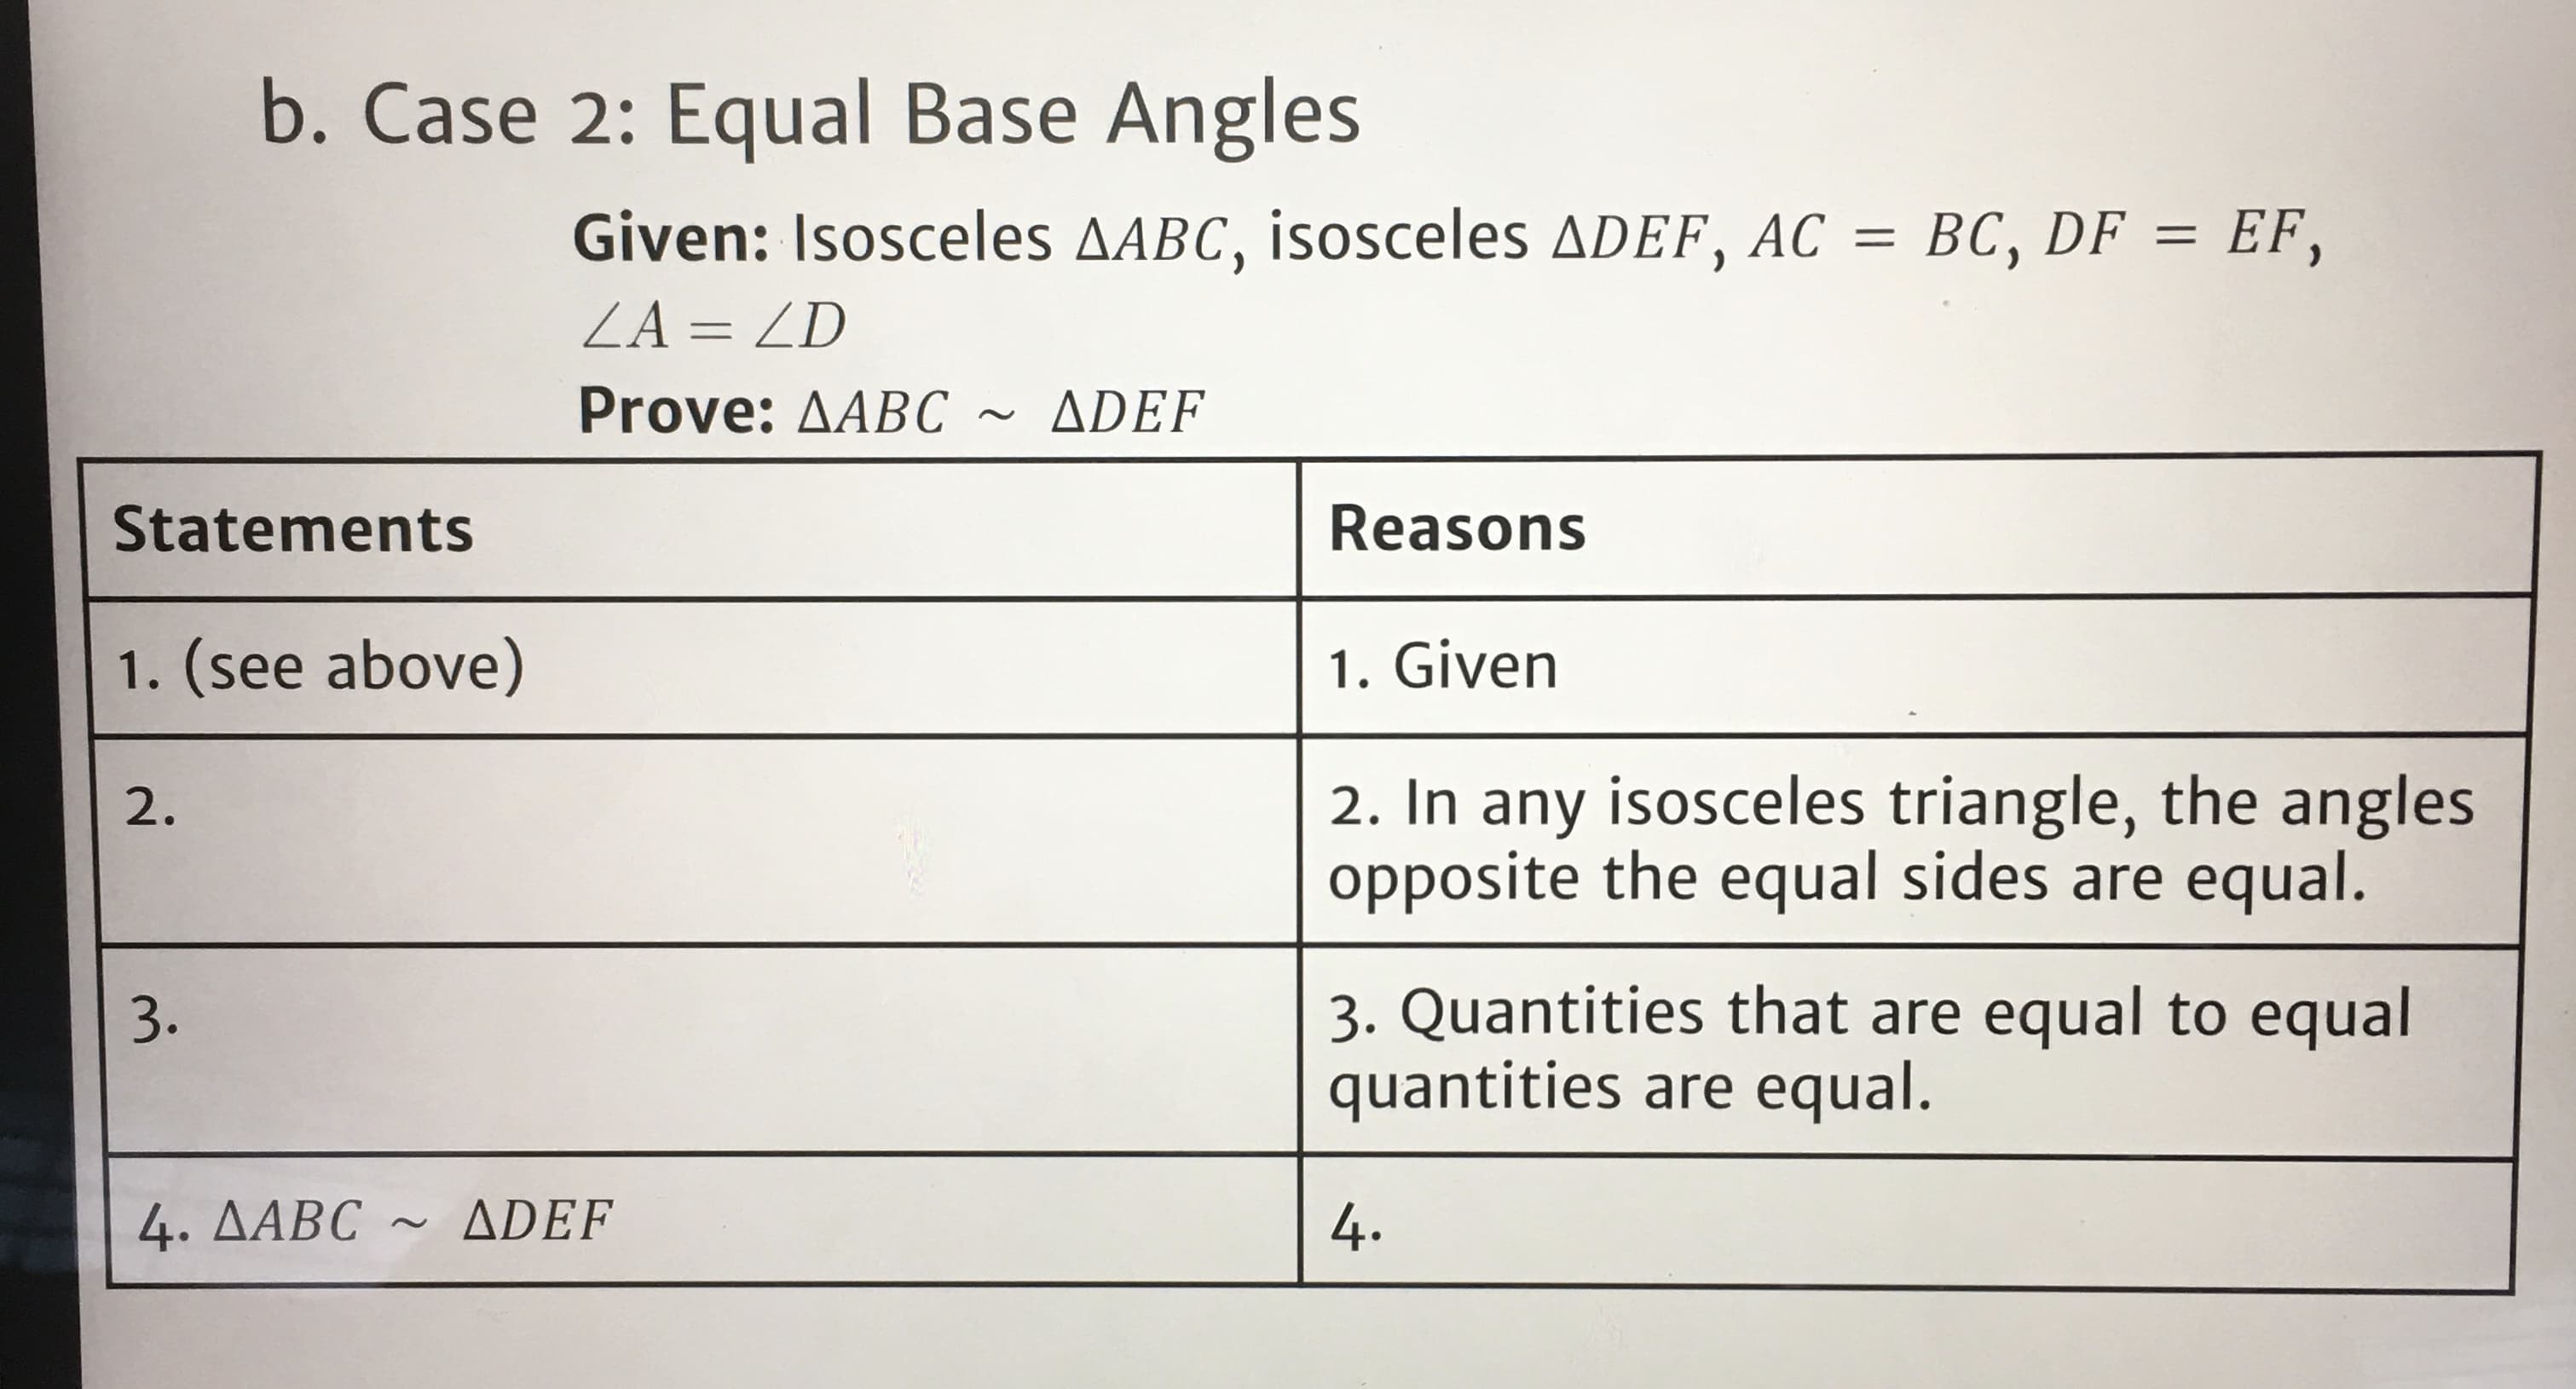 b. Case 2: Equal Base Angles
Given: Isosceles AABC, isosceles ADEF, AC = BC, DF = EF,
%3D
ZA = ZD
Prove: AABC
ADEF
Statements
Reasons
1. (see above)
1. Given
2. In any isosceles triangle, the angles
opposite the equal sides are equal.
2.
3. Quantities that are equal to equal
quantities are equal.
3.
4. AABC ~ ADEF
4.
